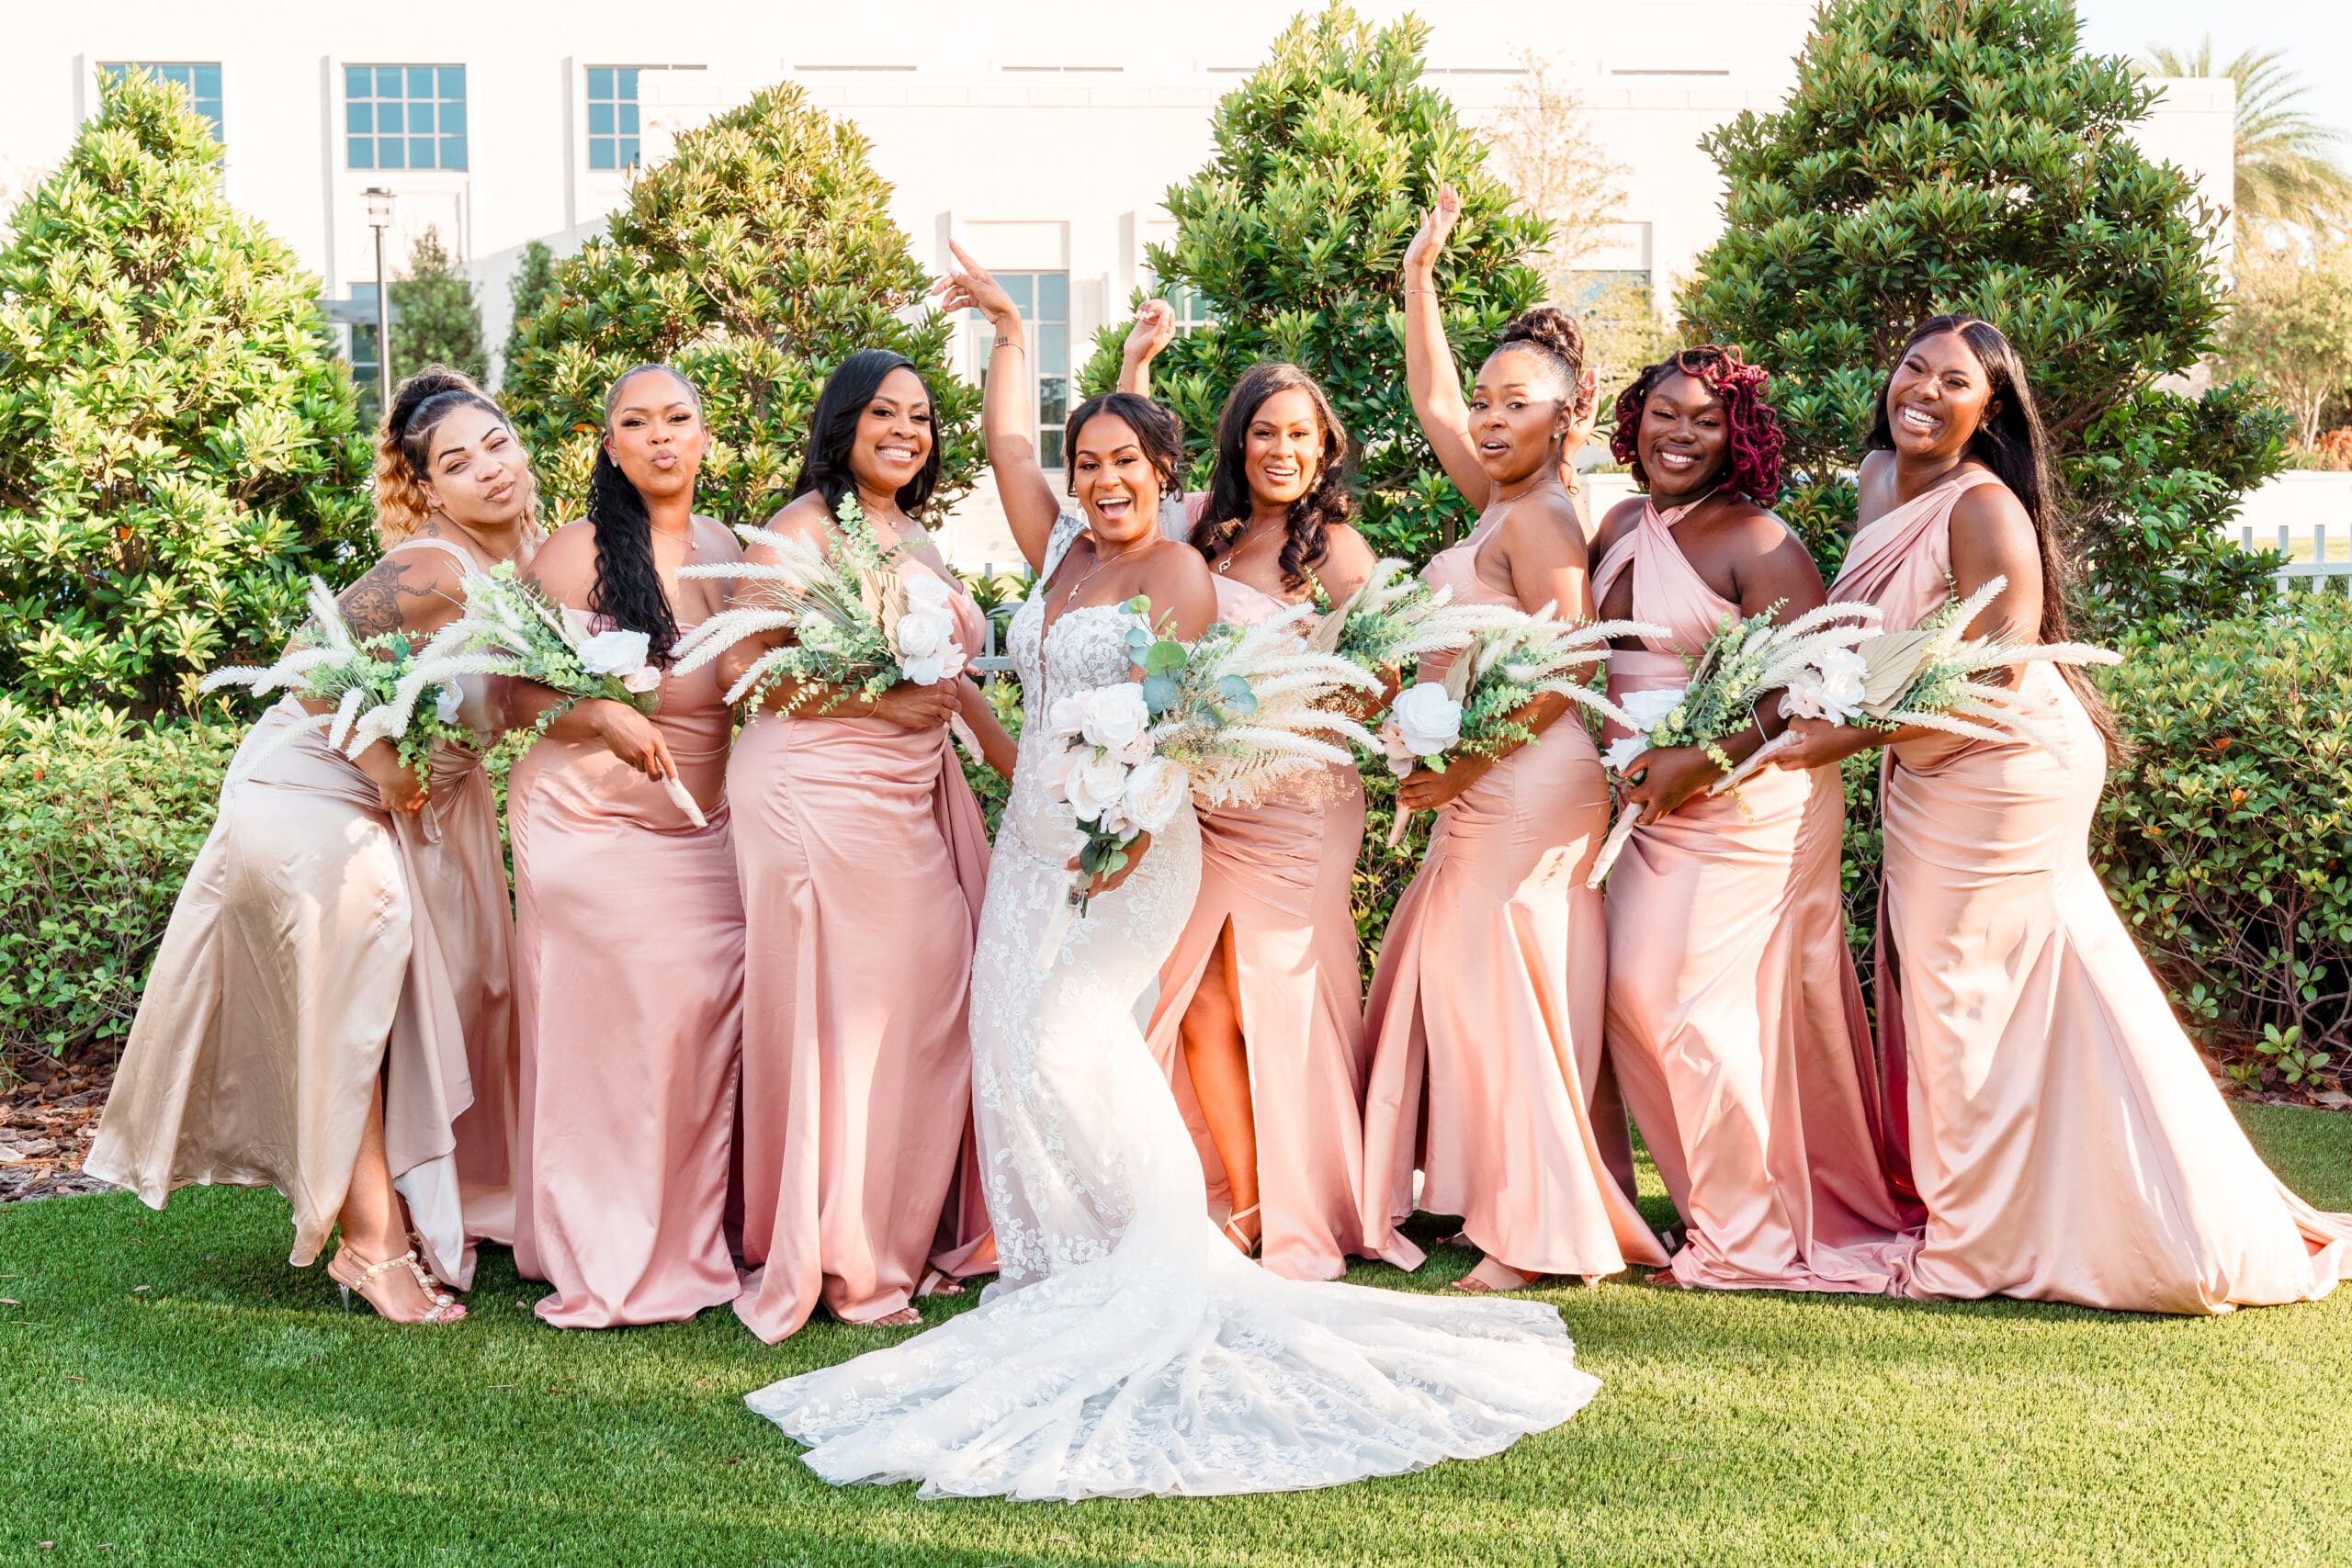 Lateisha and another set of bridesmaids in pink dresses posing together for a celebratory photo.